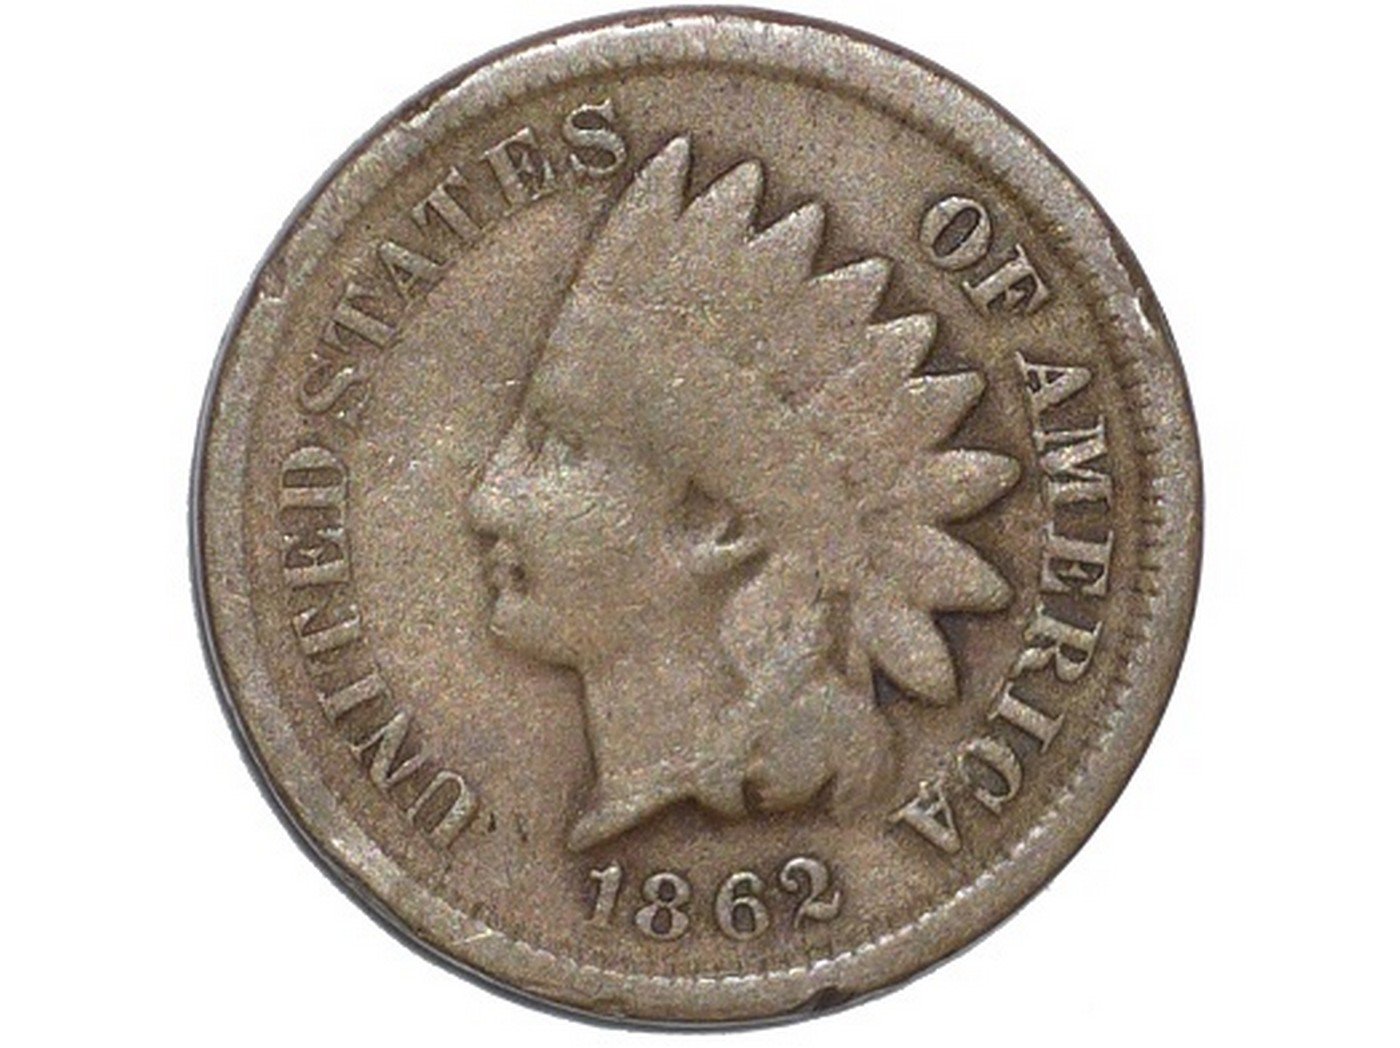 1862 Obverse of CUD-012 - Indian Head Penny - Photo by David Poliquin